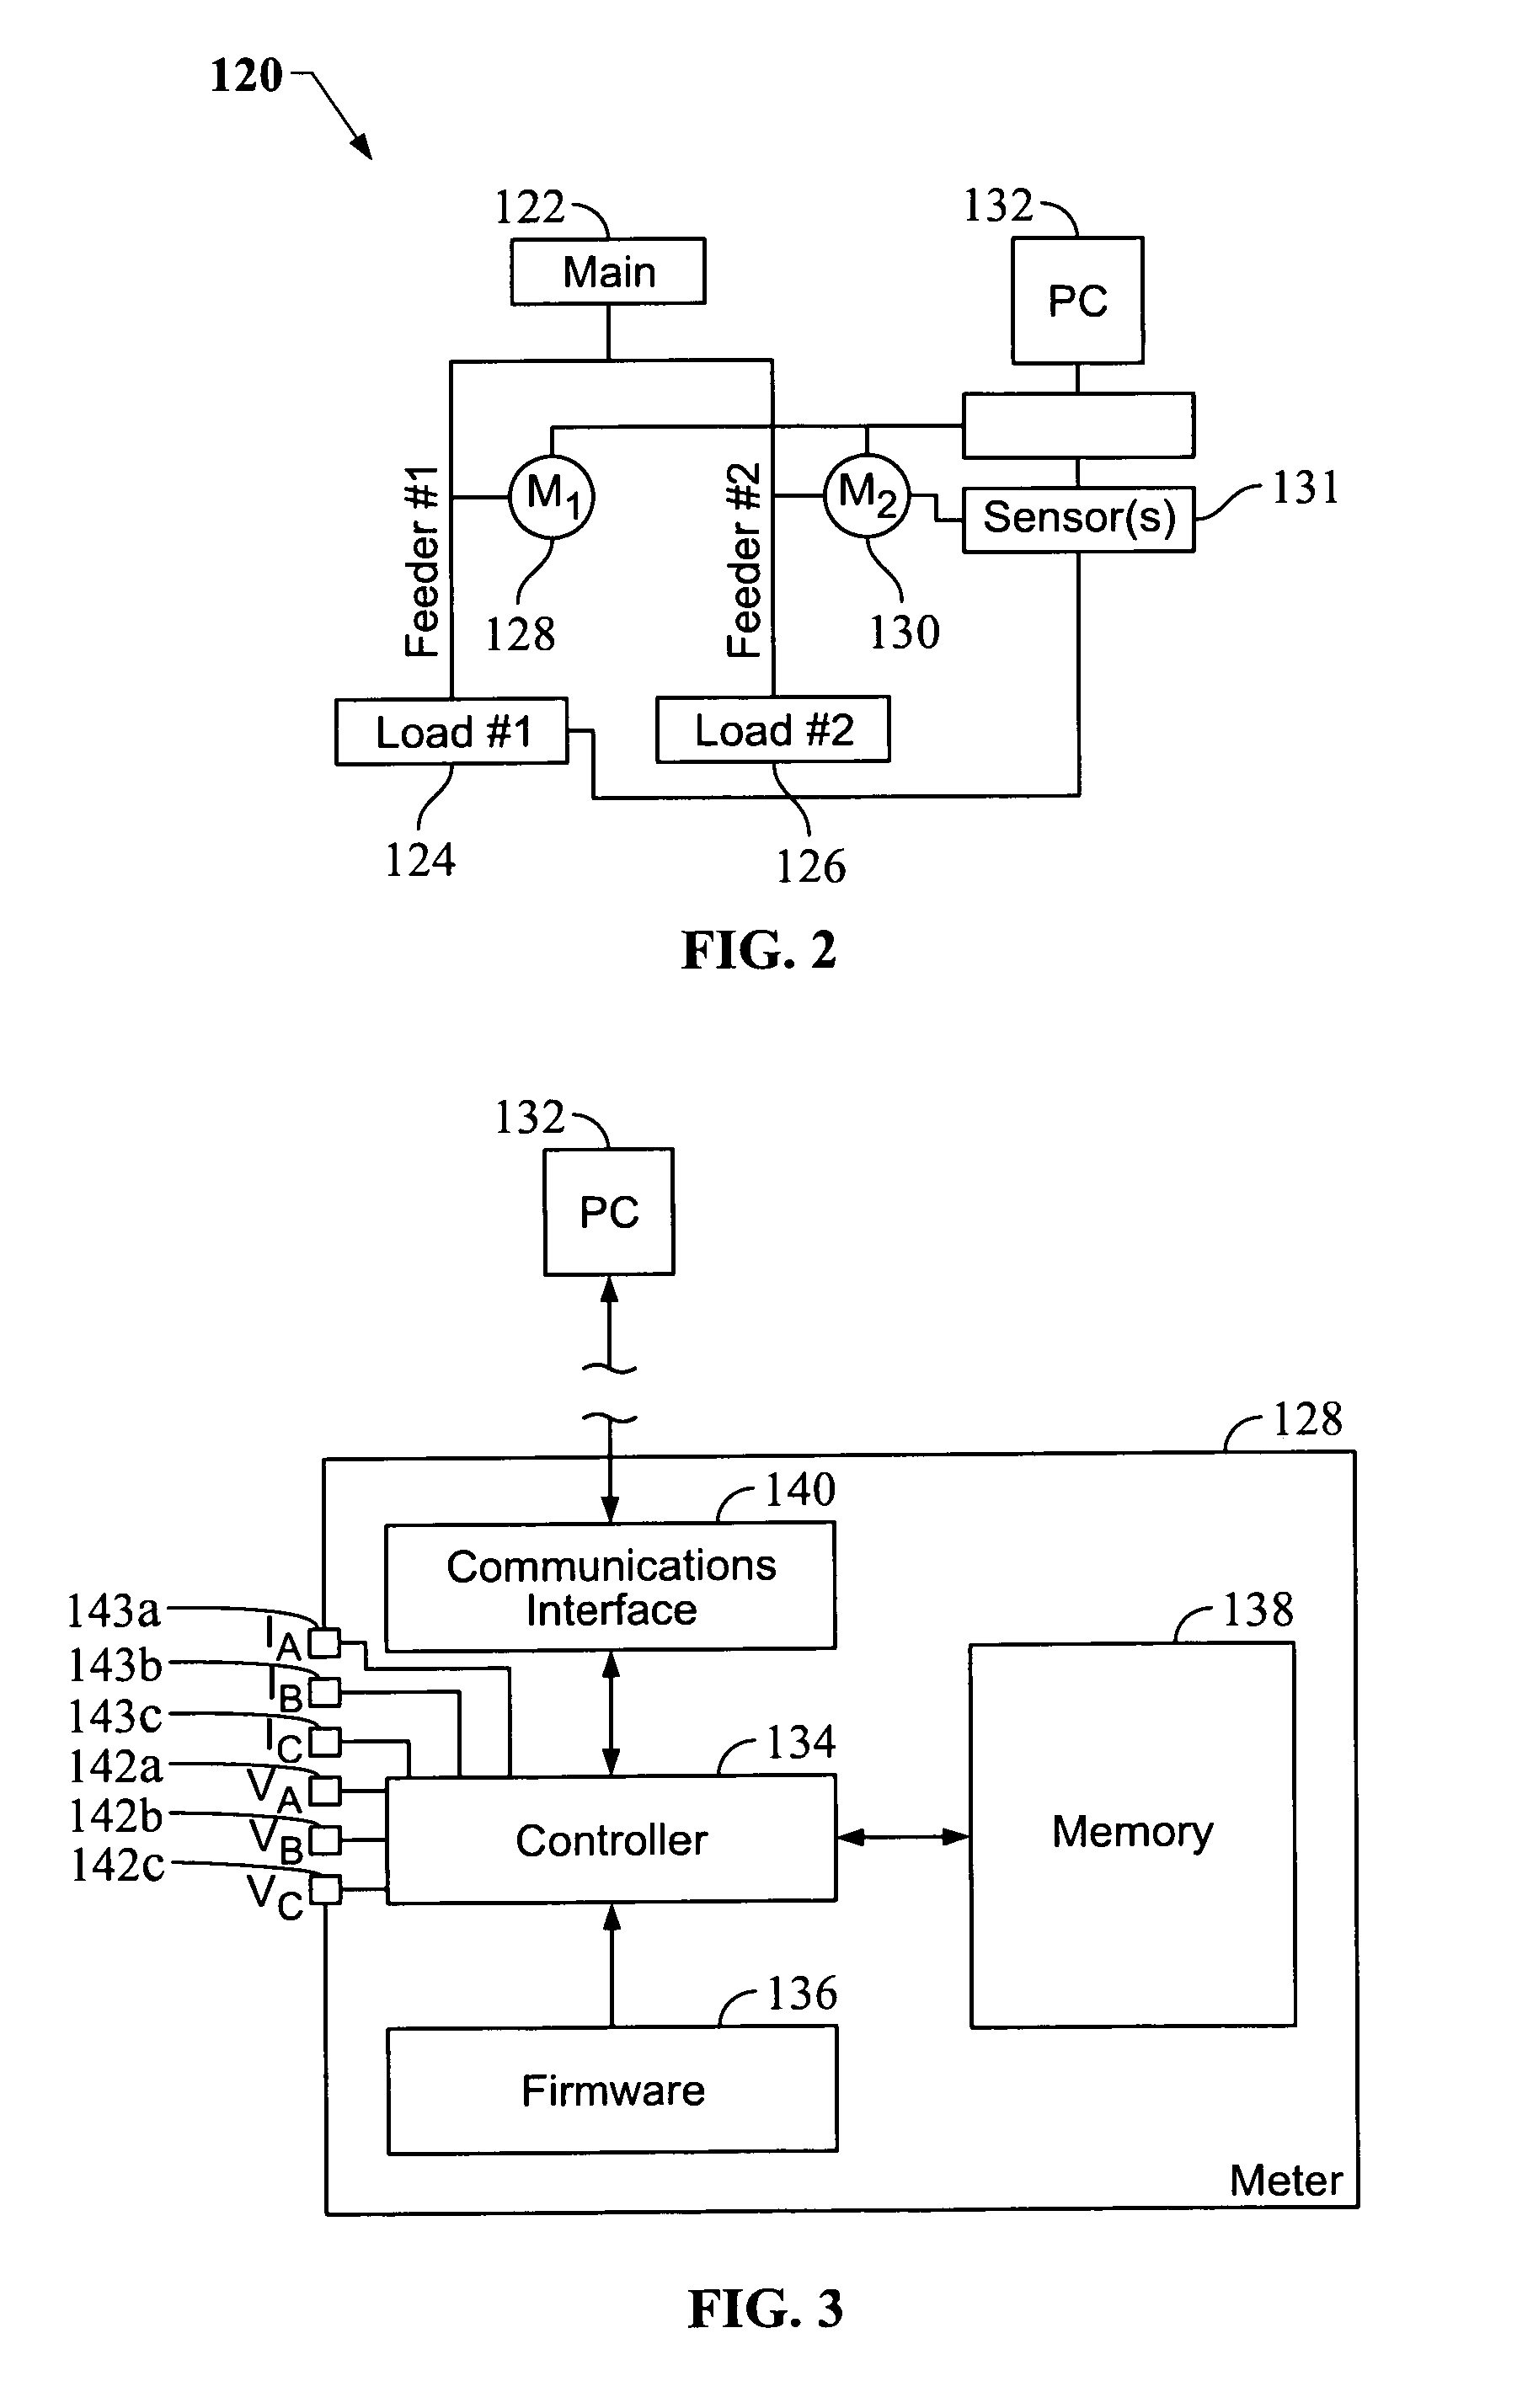 Method for process monitoring in a utility system